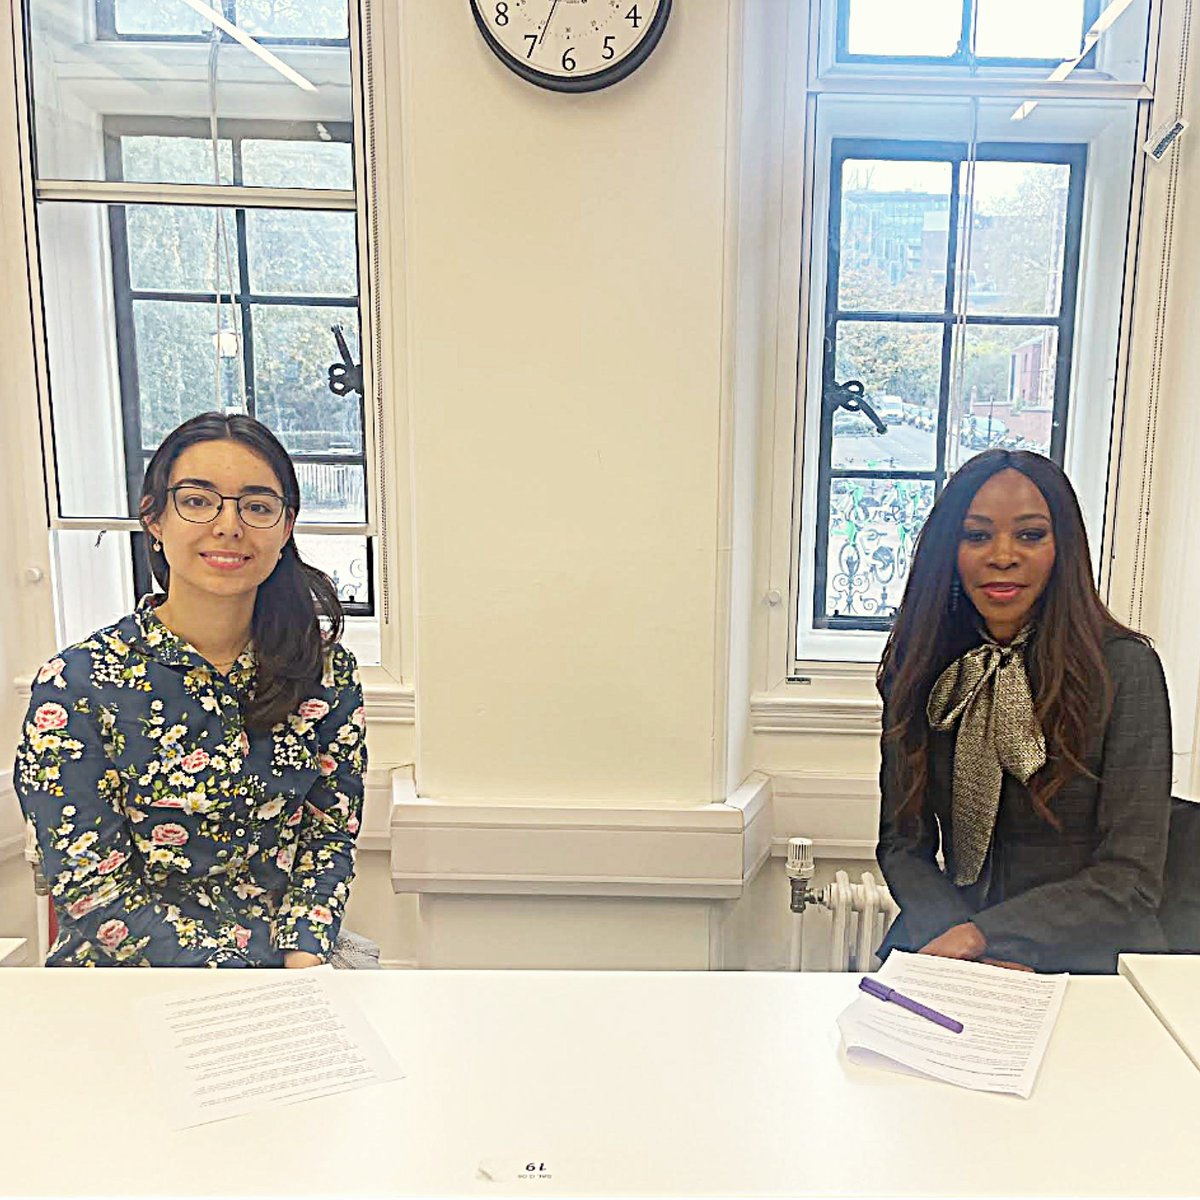 Our future economists at @LSEEcon put me through my paces on 'The Beverage Report' podcast with insightful questions on the challenges ahead for the Global Economy: *IWF Growth Projections *Energy Transition *Inequality open.spotify.com/episode/5Rd4bM… #energy #growth #inequality